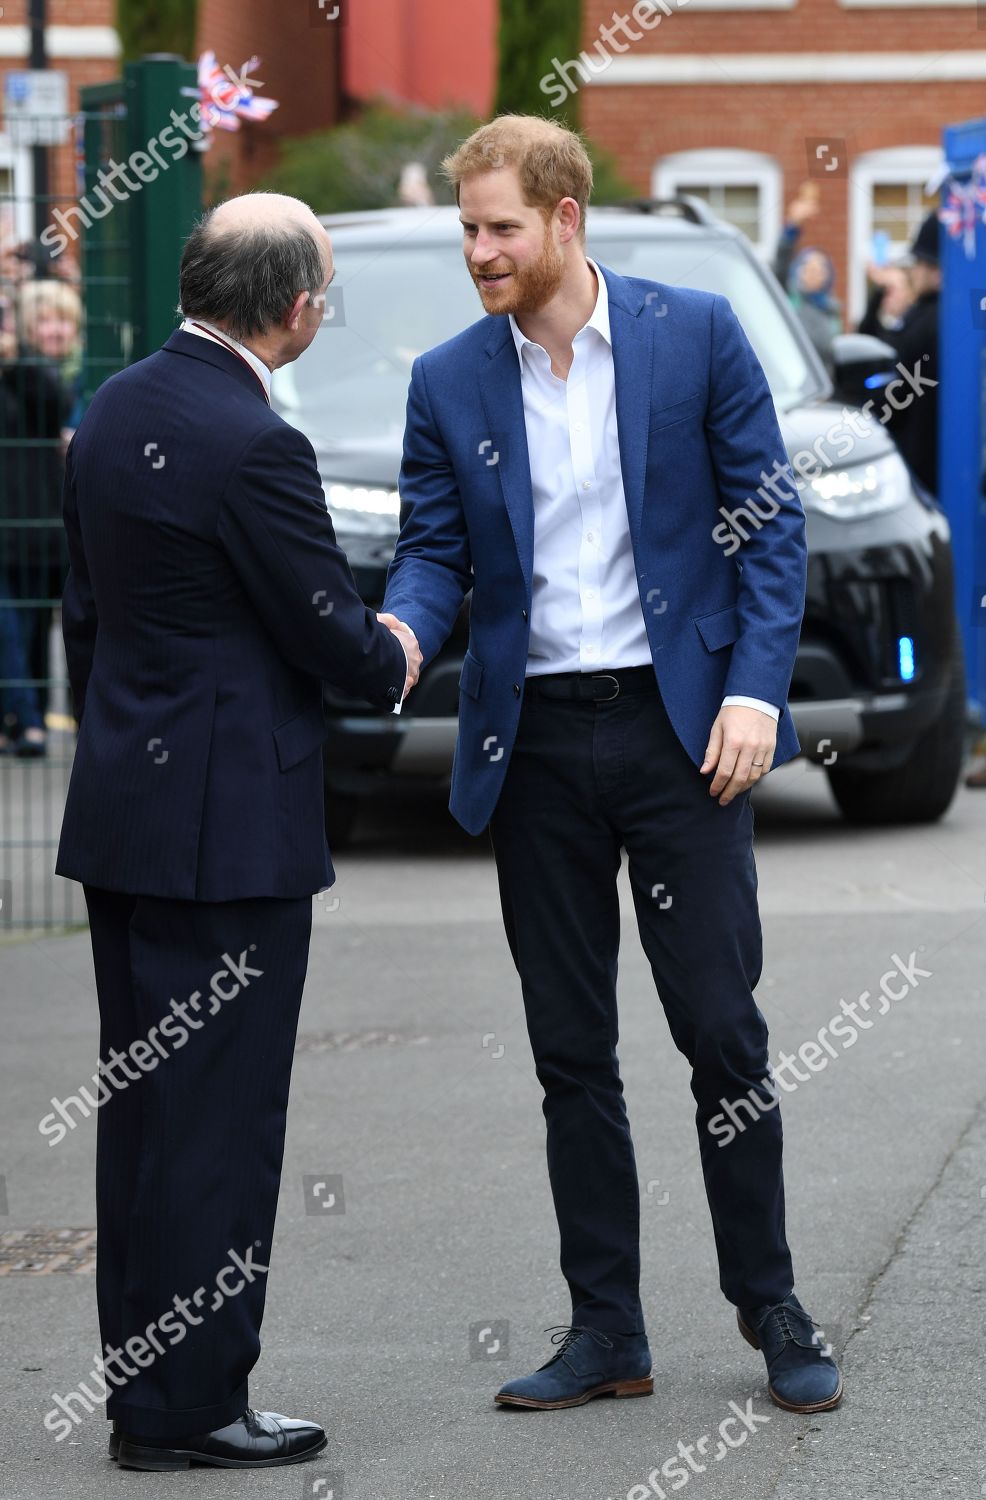 prince-harry-visits-st-vincents-catholic-primary-school-for-commonwealth-canopy-and-woodland-trust-tree-planting-ceremony-london-uk-shutterstock-editorial-10160984c.jpg